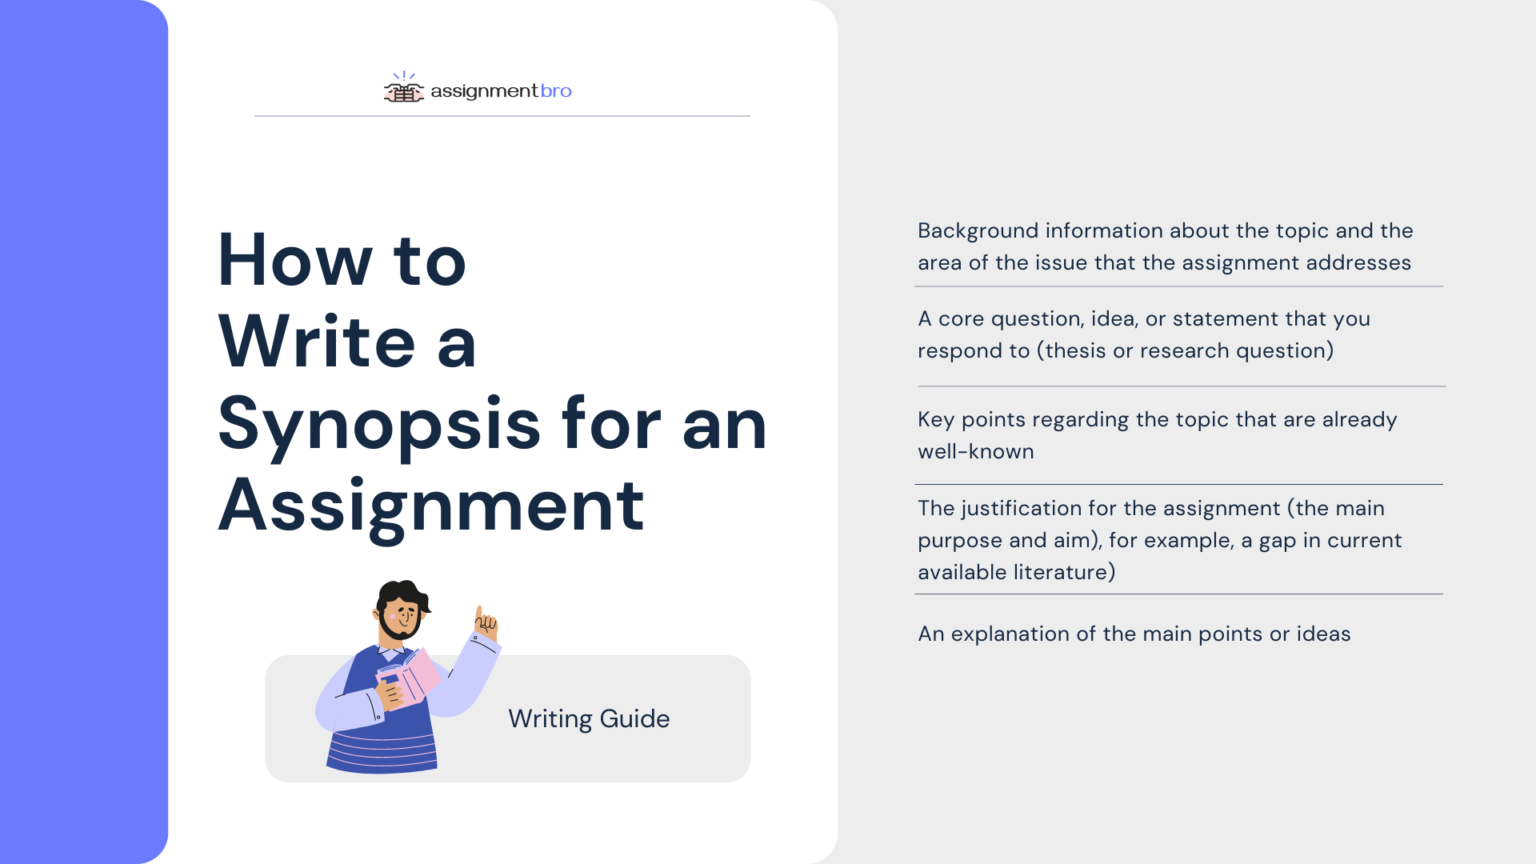 how to write a synopsis for presentation